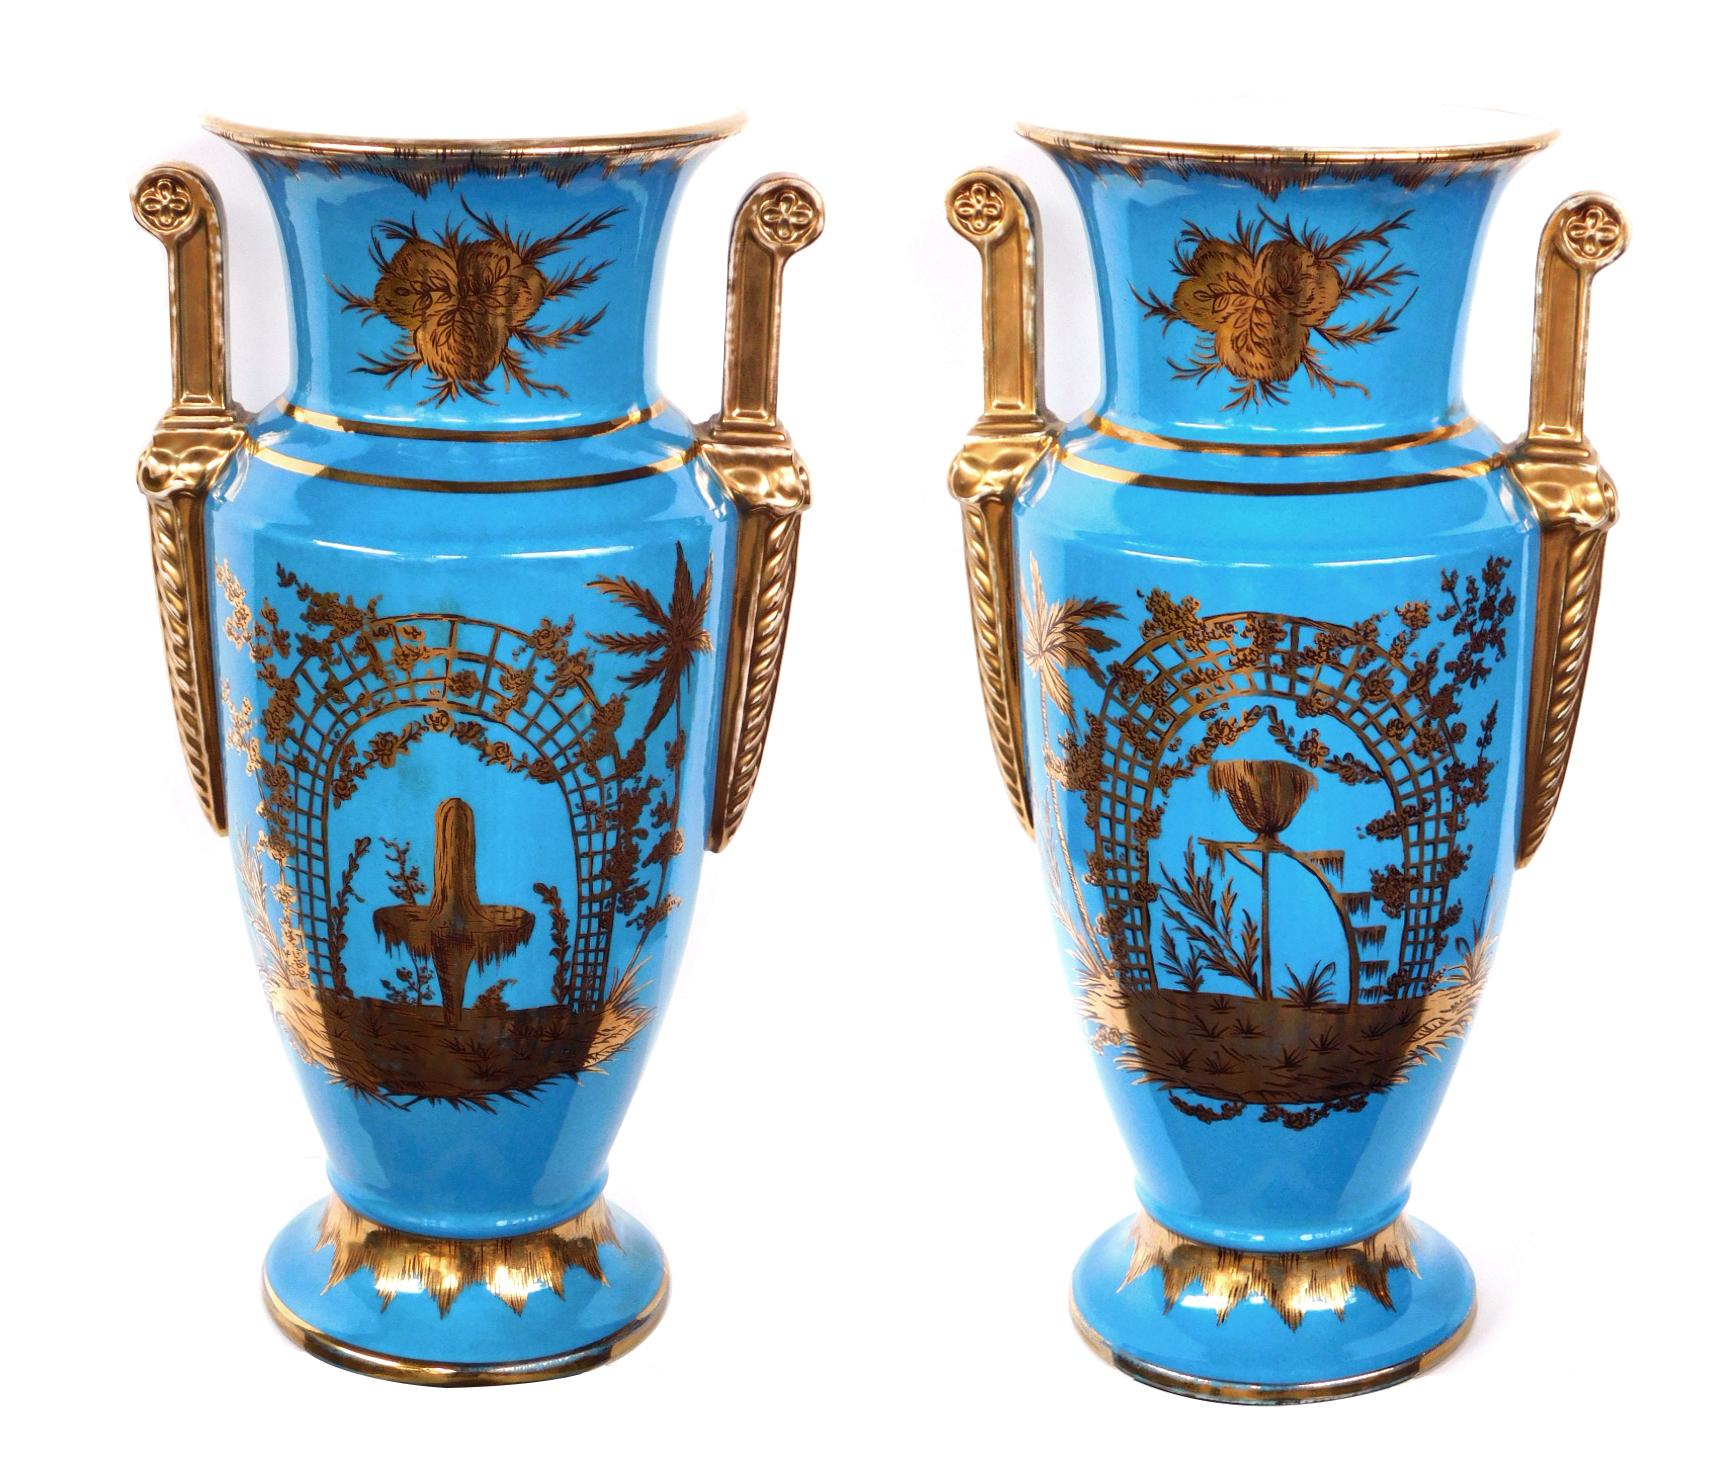 Four Empire Style Cerulean-Glazed Porcelain Vases with Chinoiserie Motifs 6